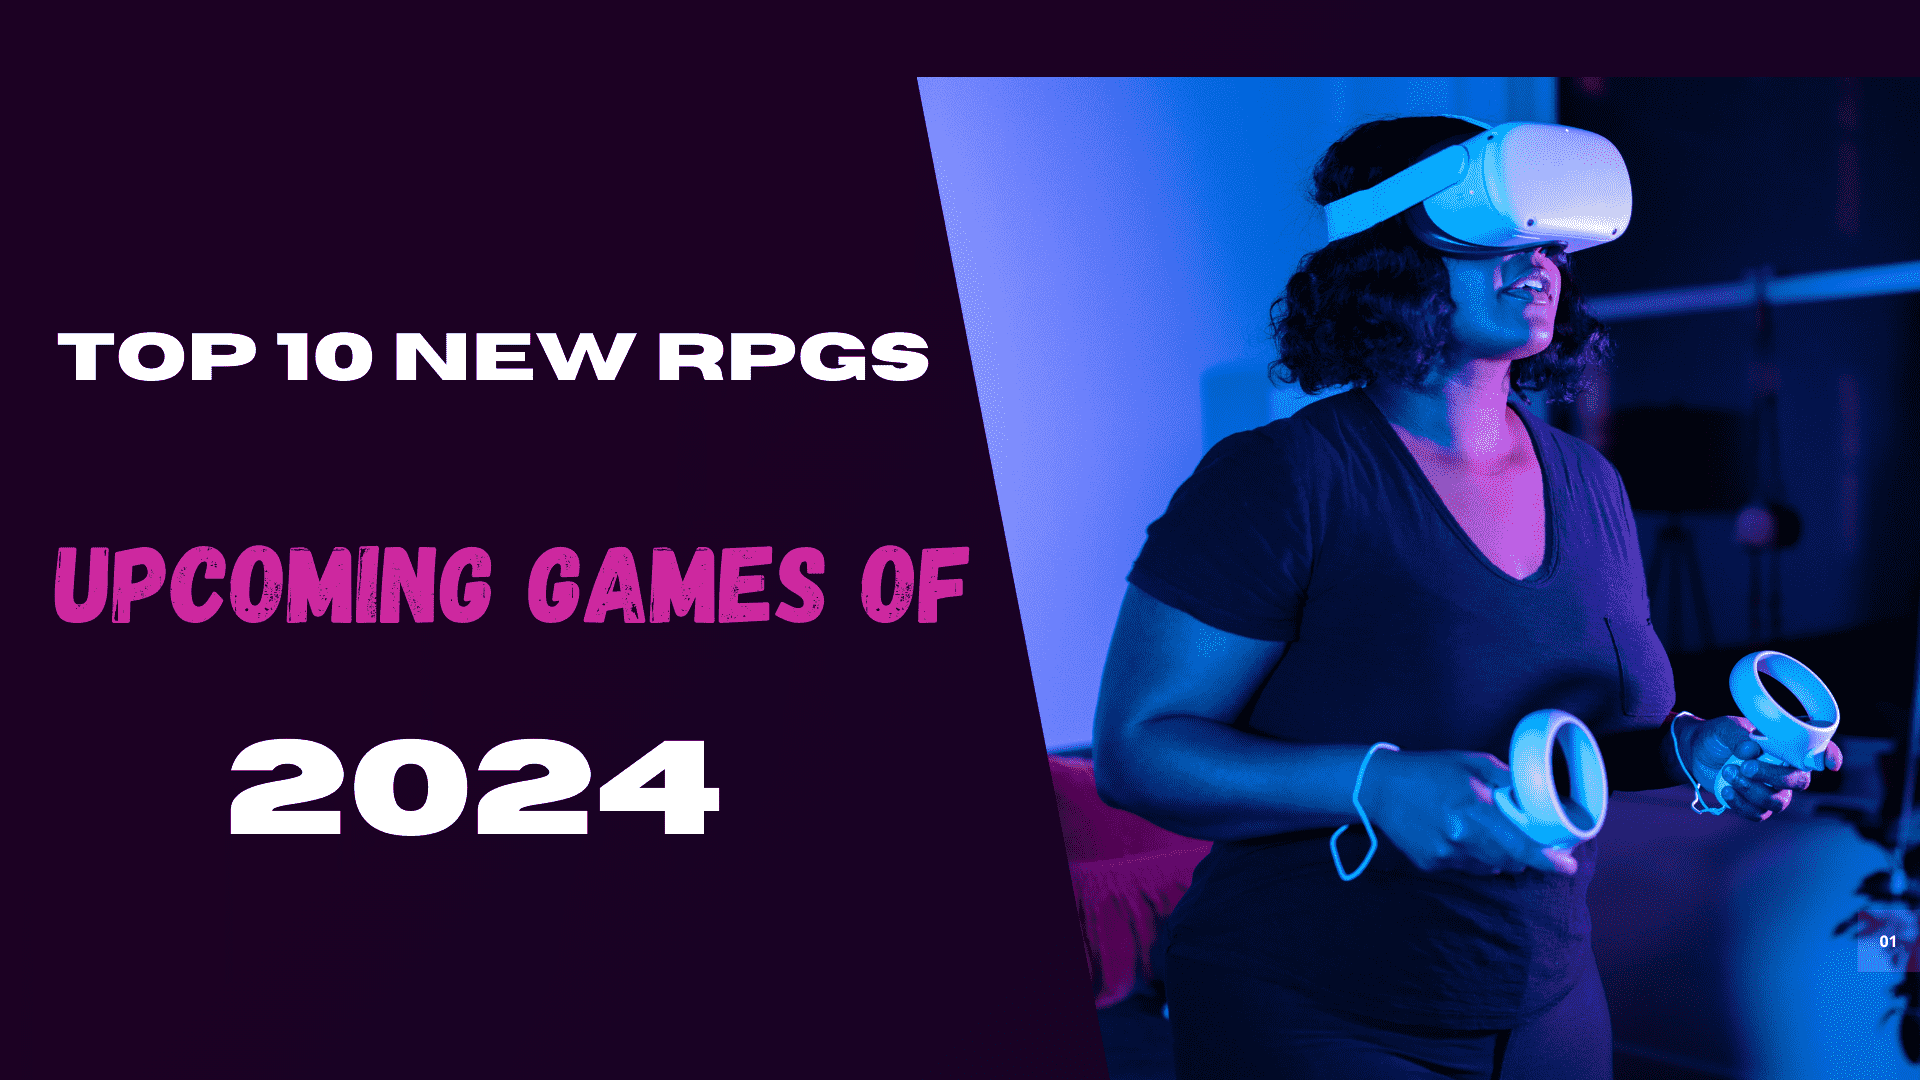 Top 10 NEW RPGs games of 2024